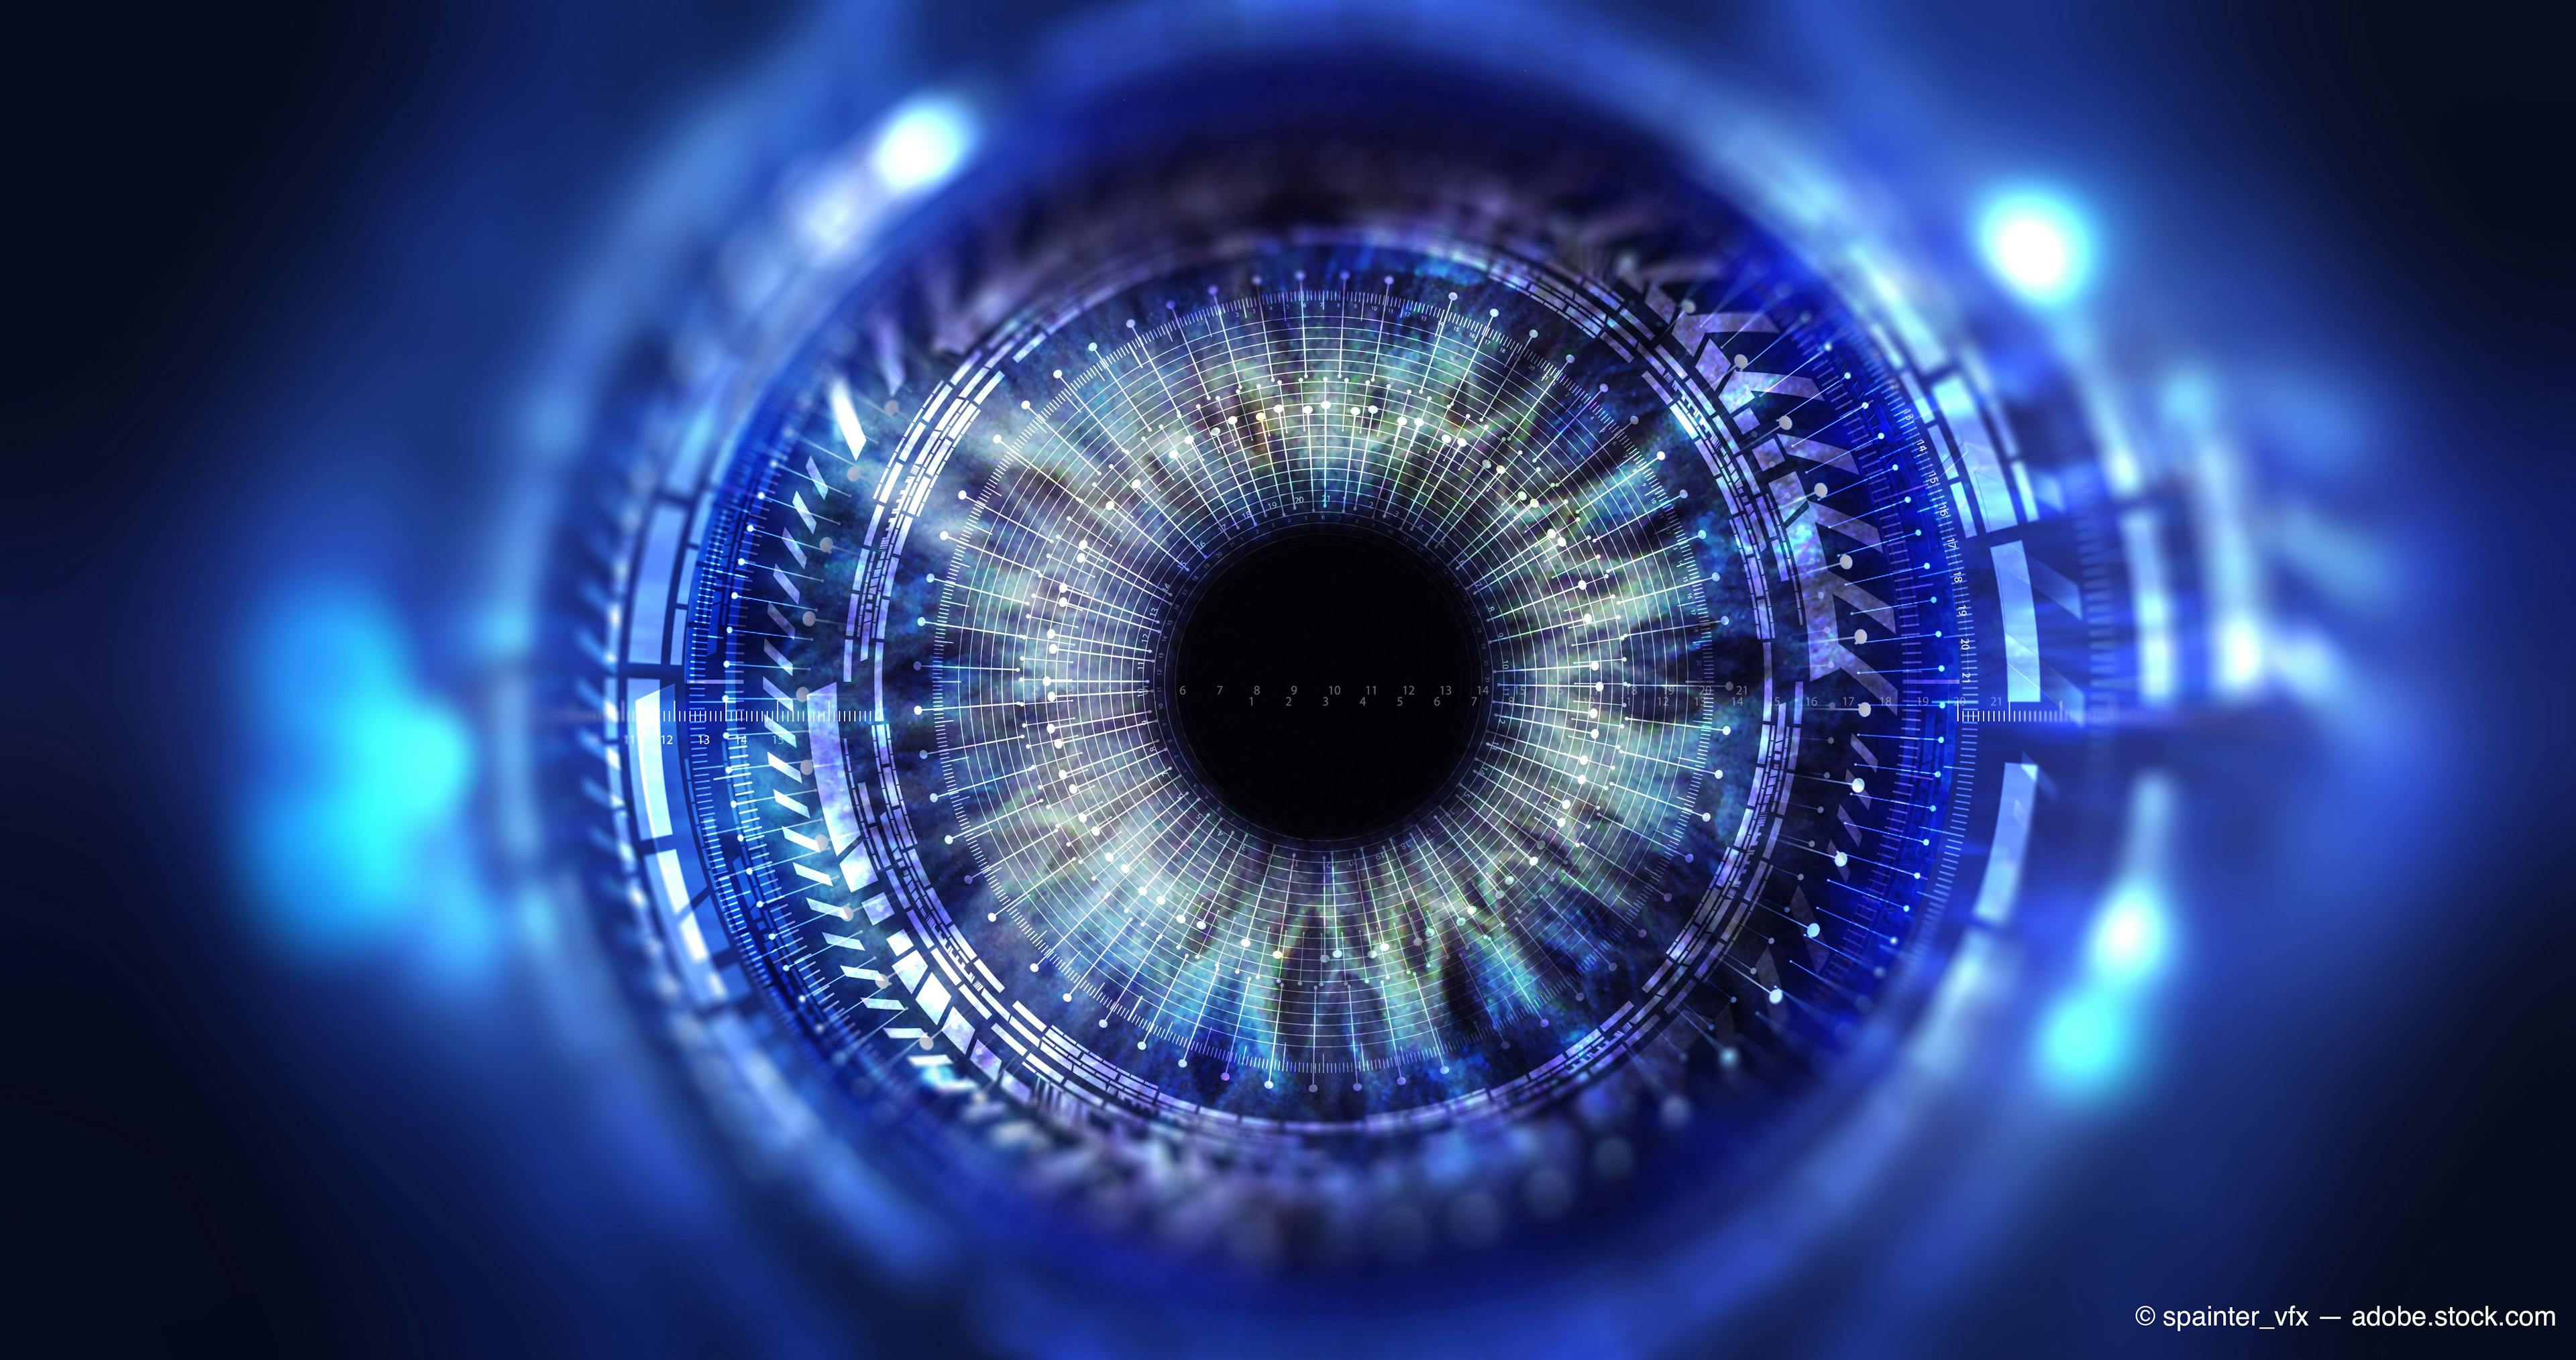 The future of ophthalmology: Part II